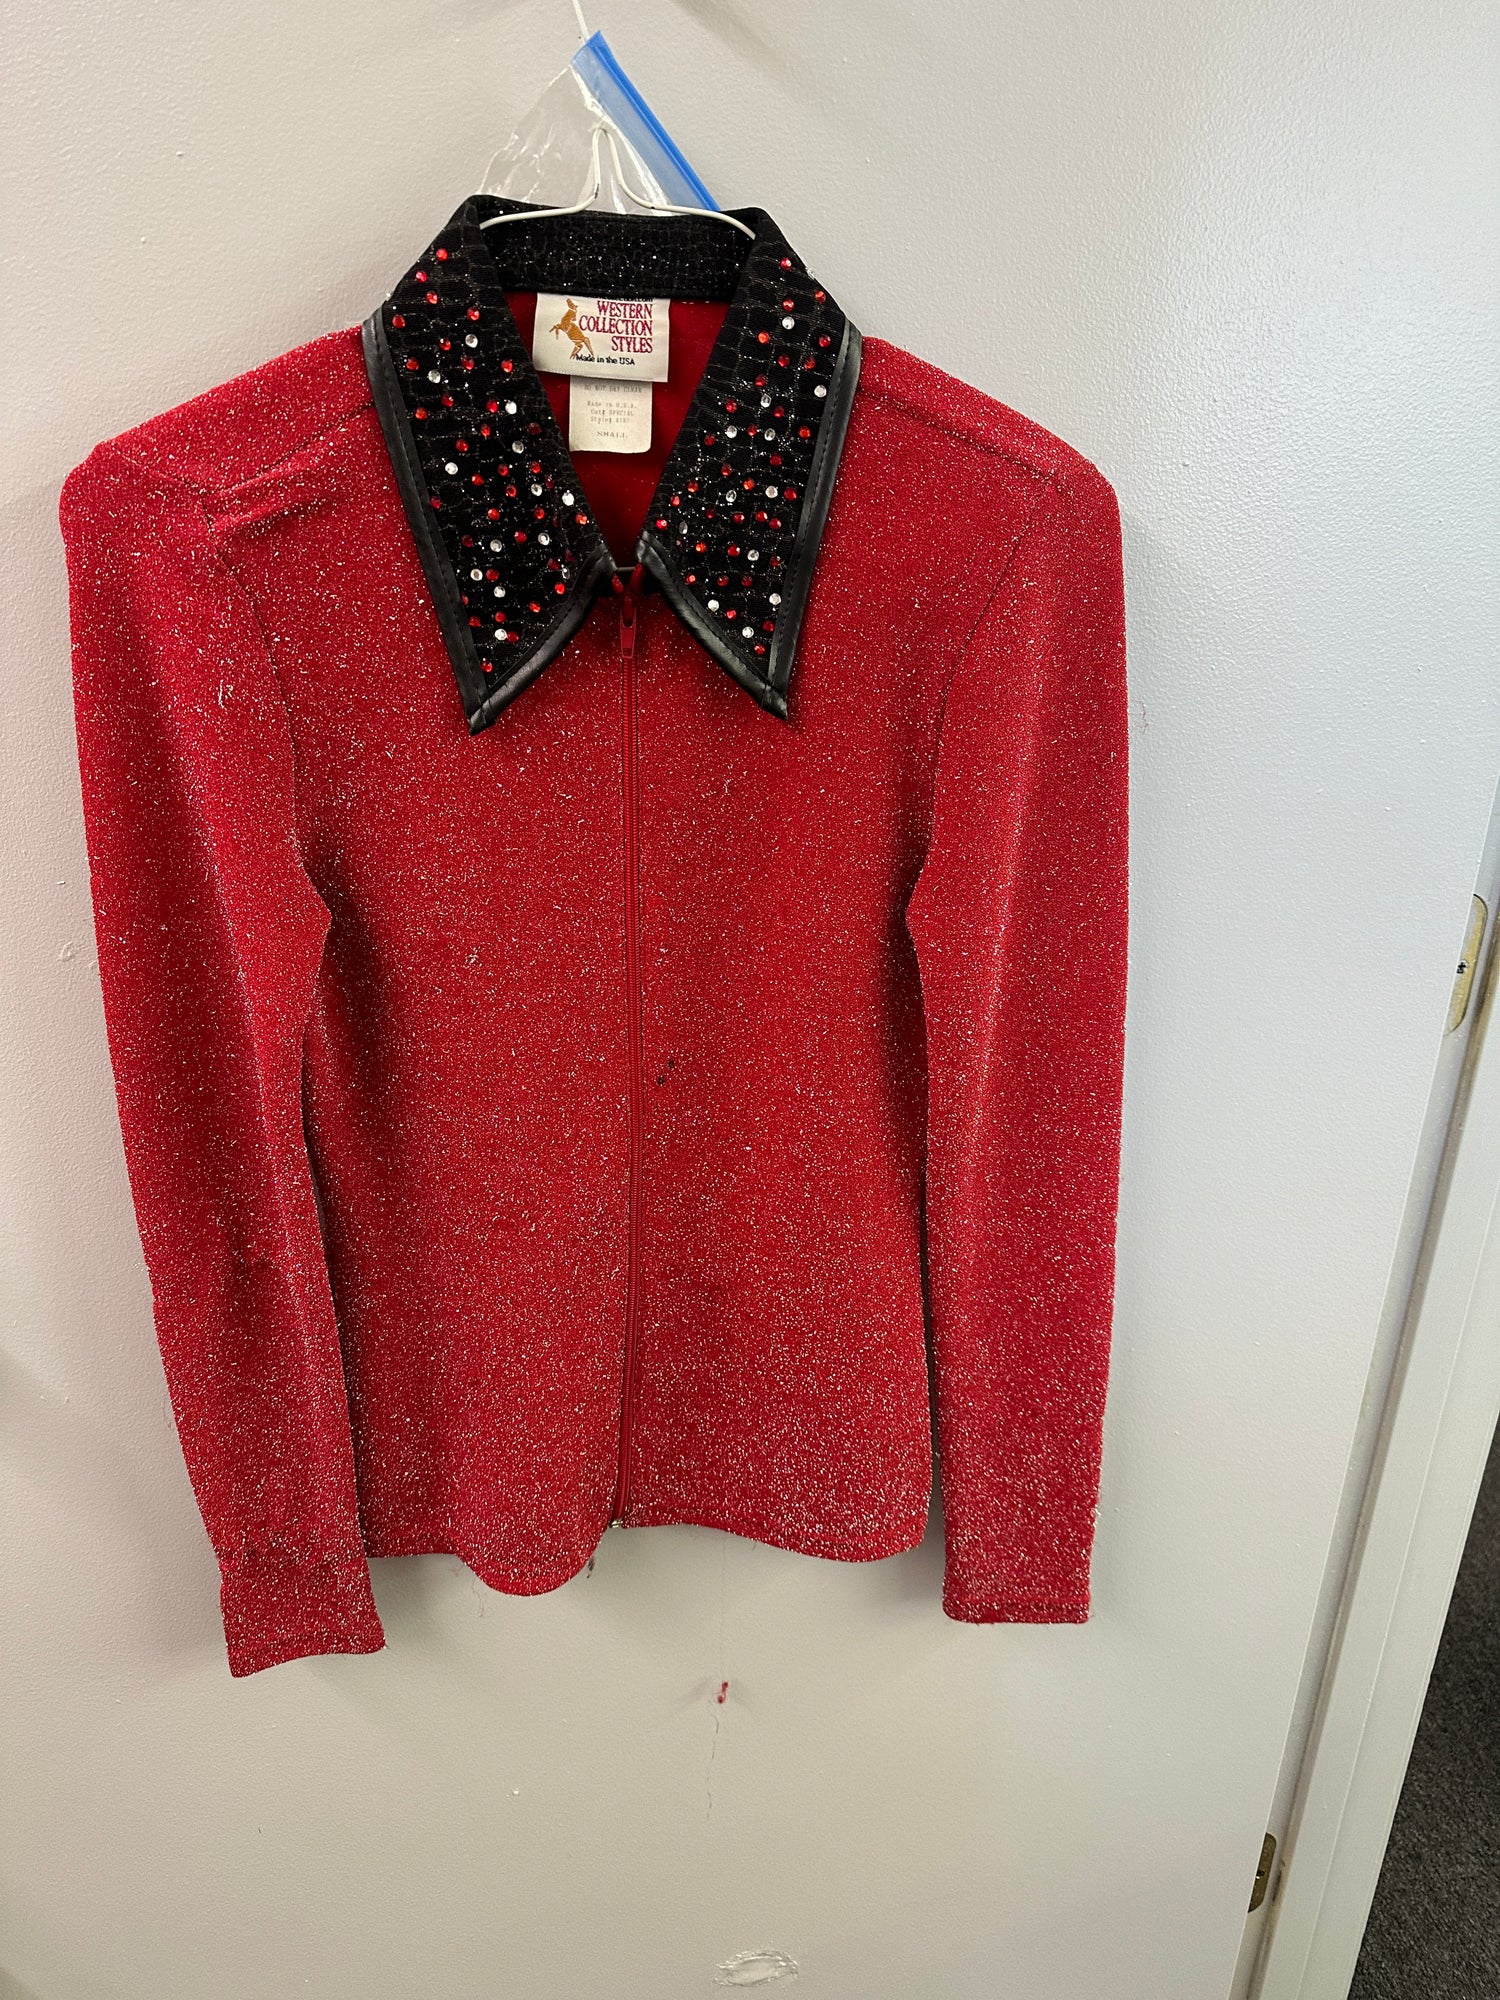 Women's Western Collection Red Sparkle Shirt  with black bling collar